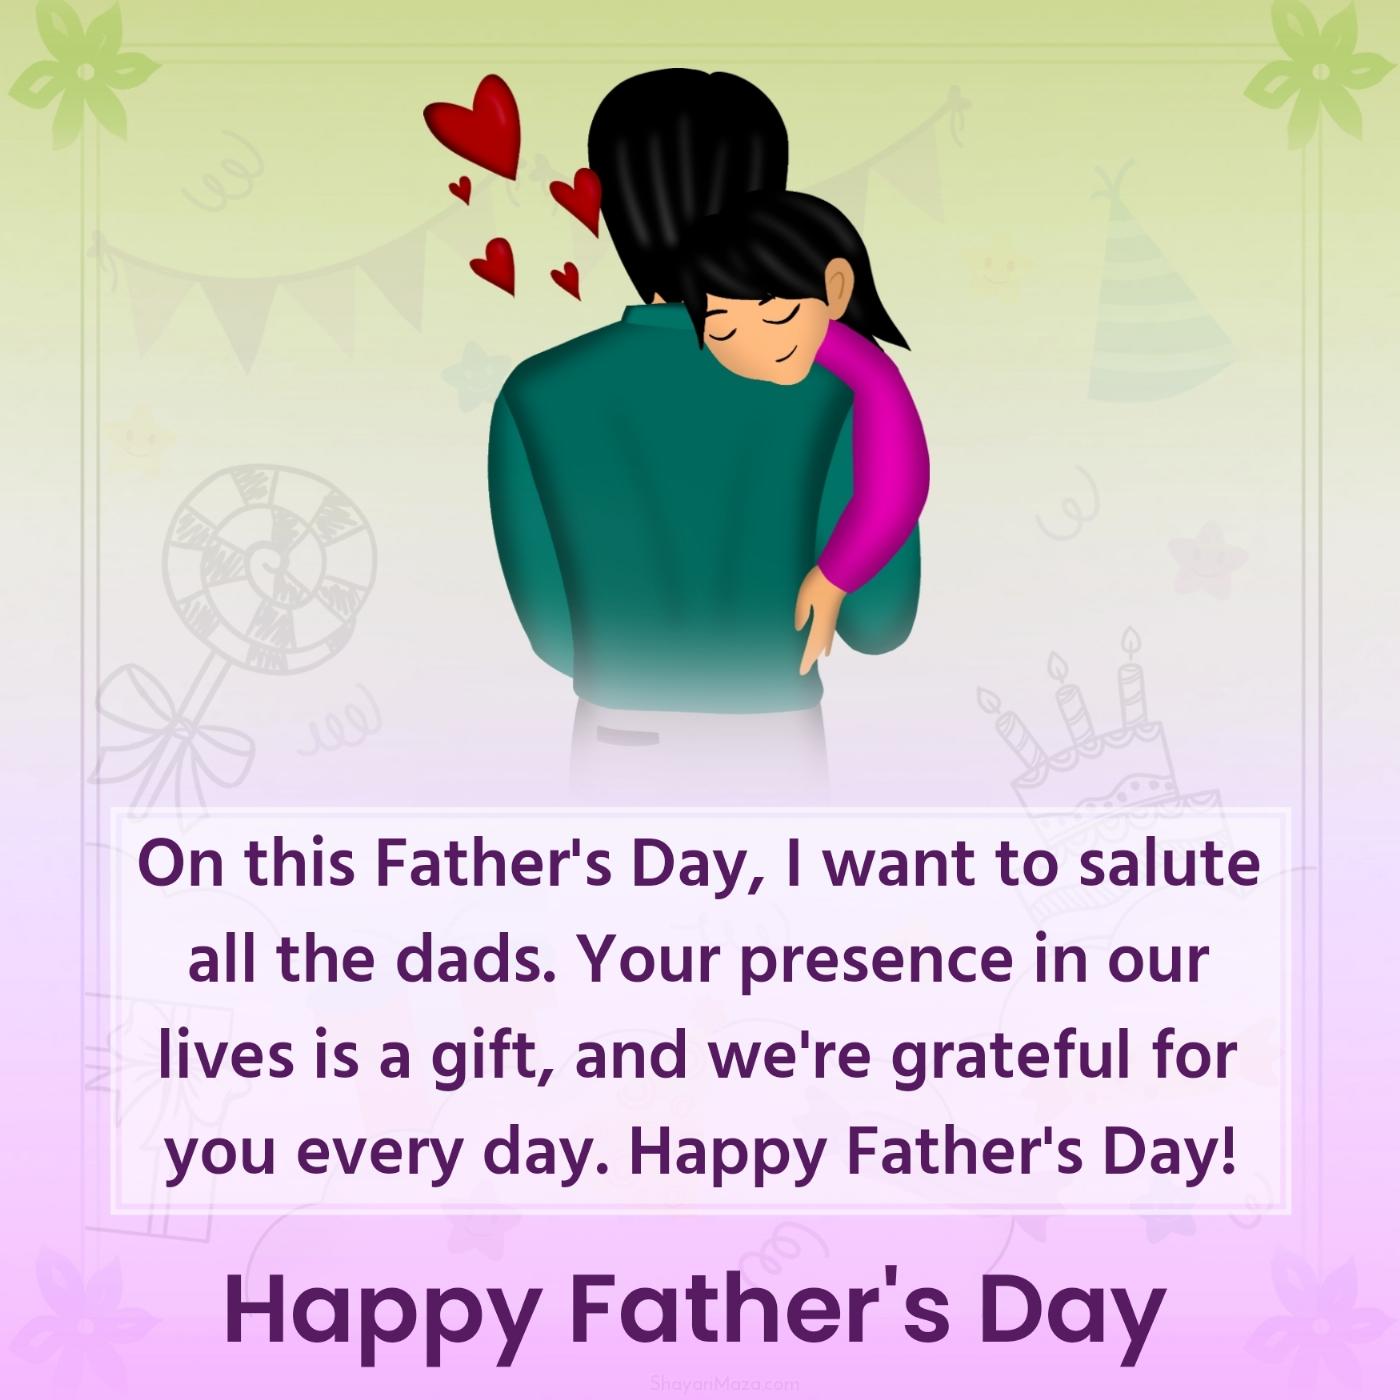 On this Father's Day I want to salute all the dads